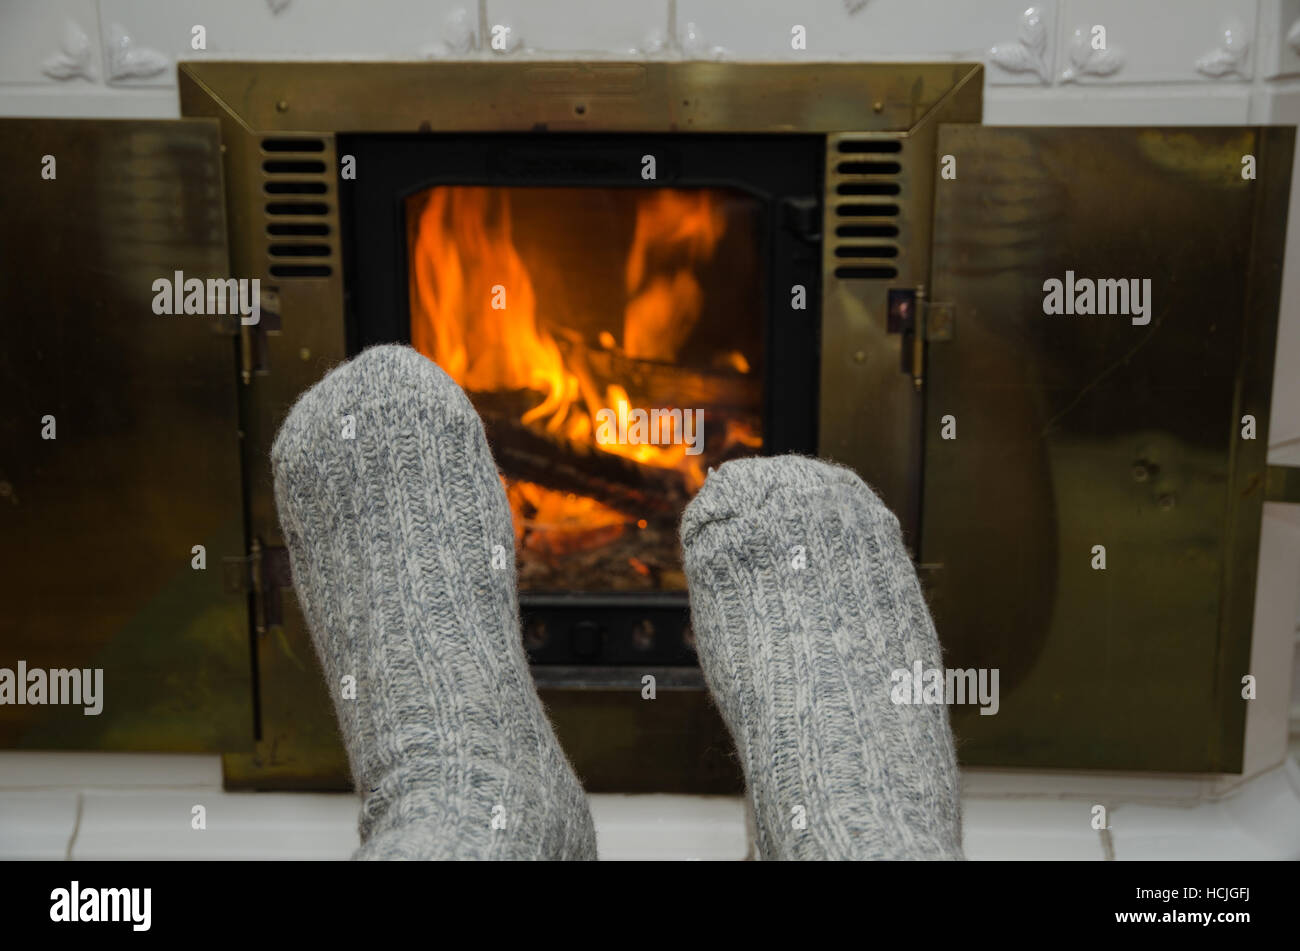 Feet with gray socks in front of an indoors fireplace Stock Photo